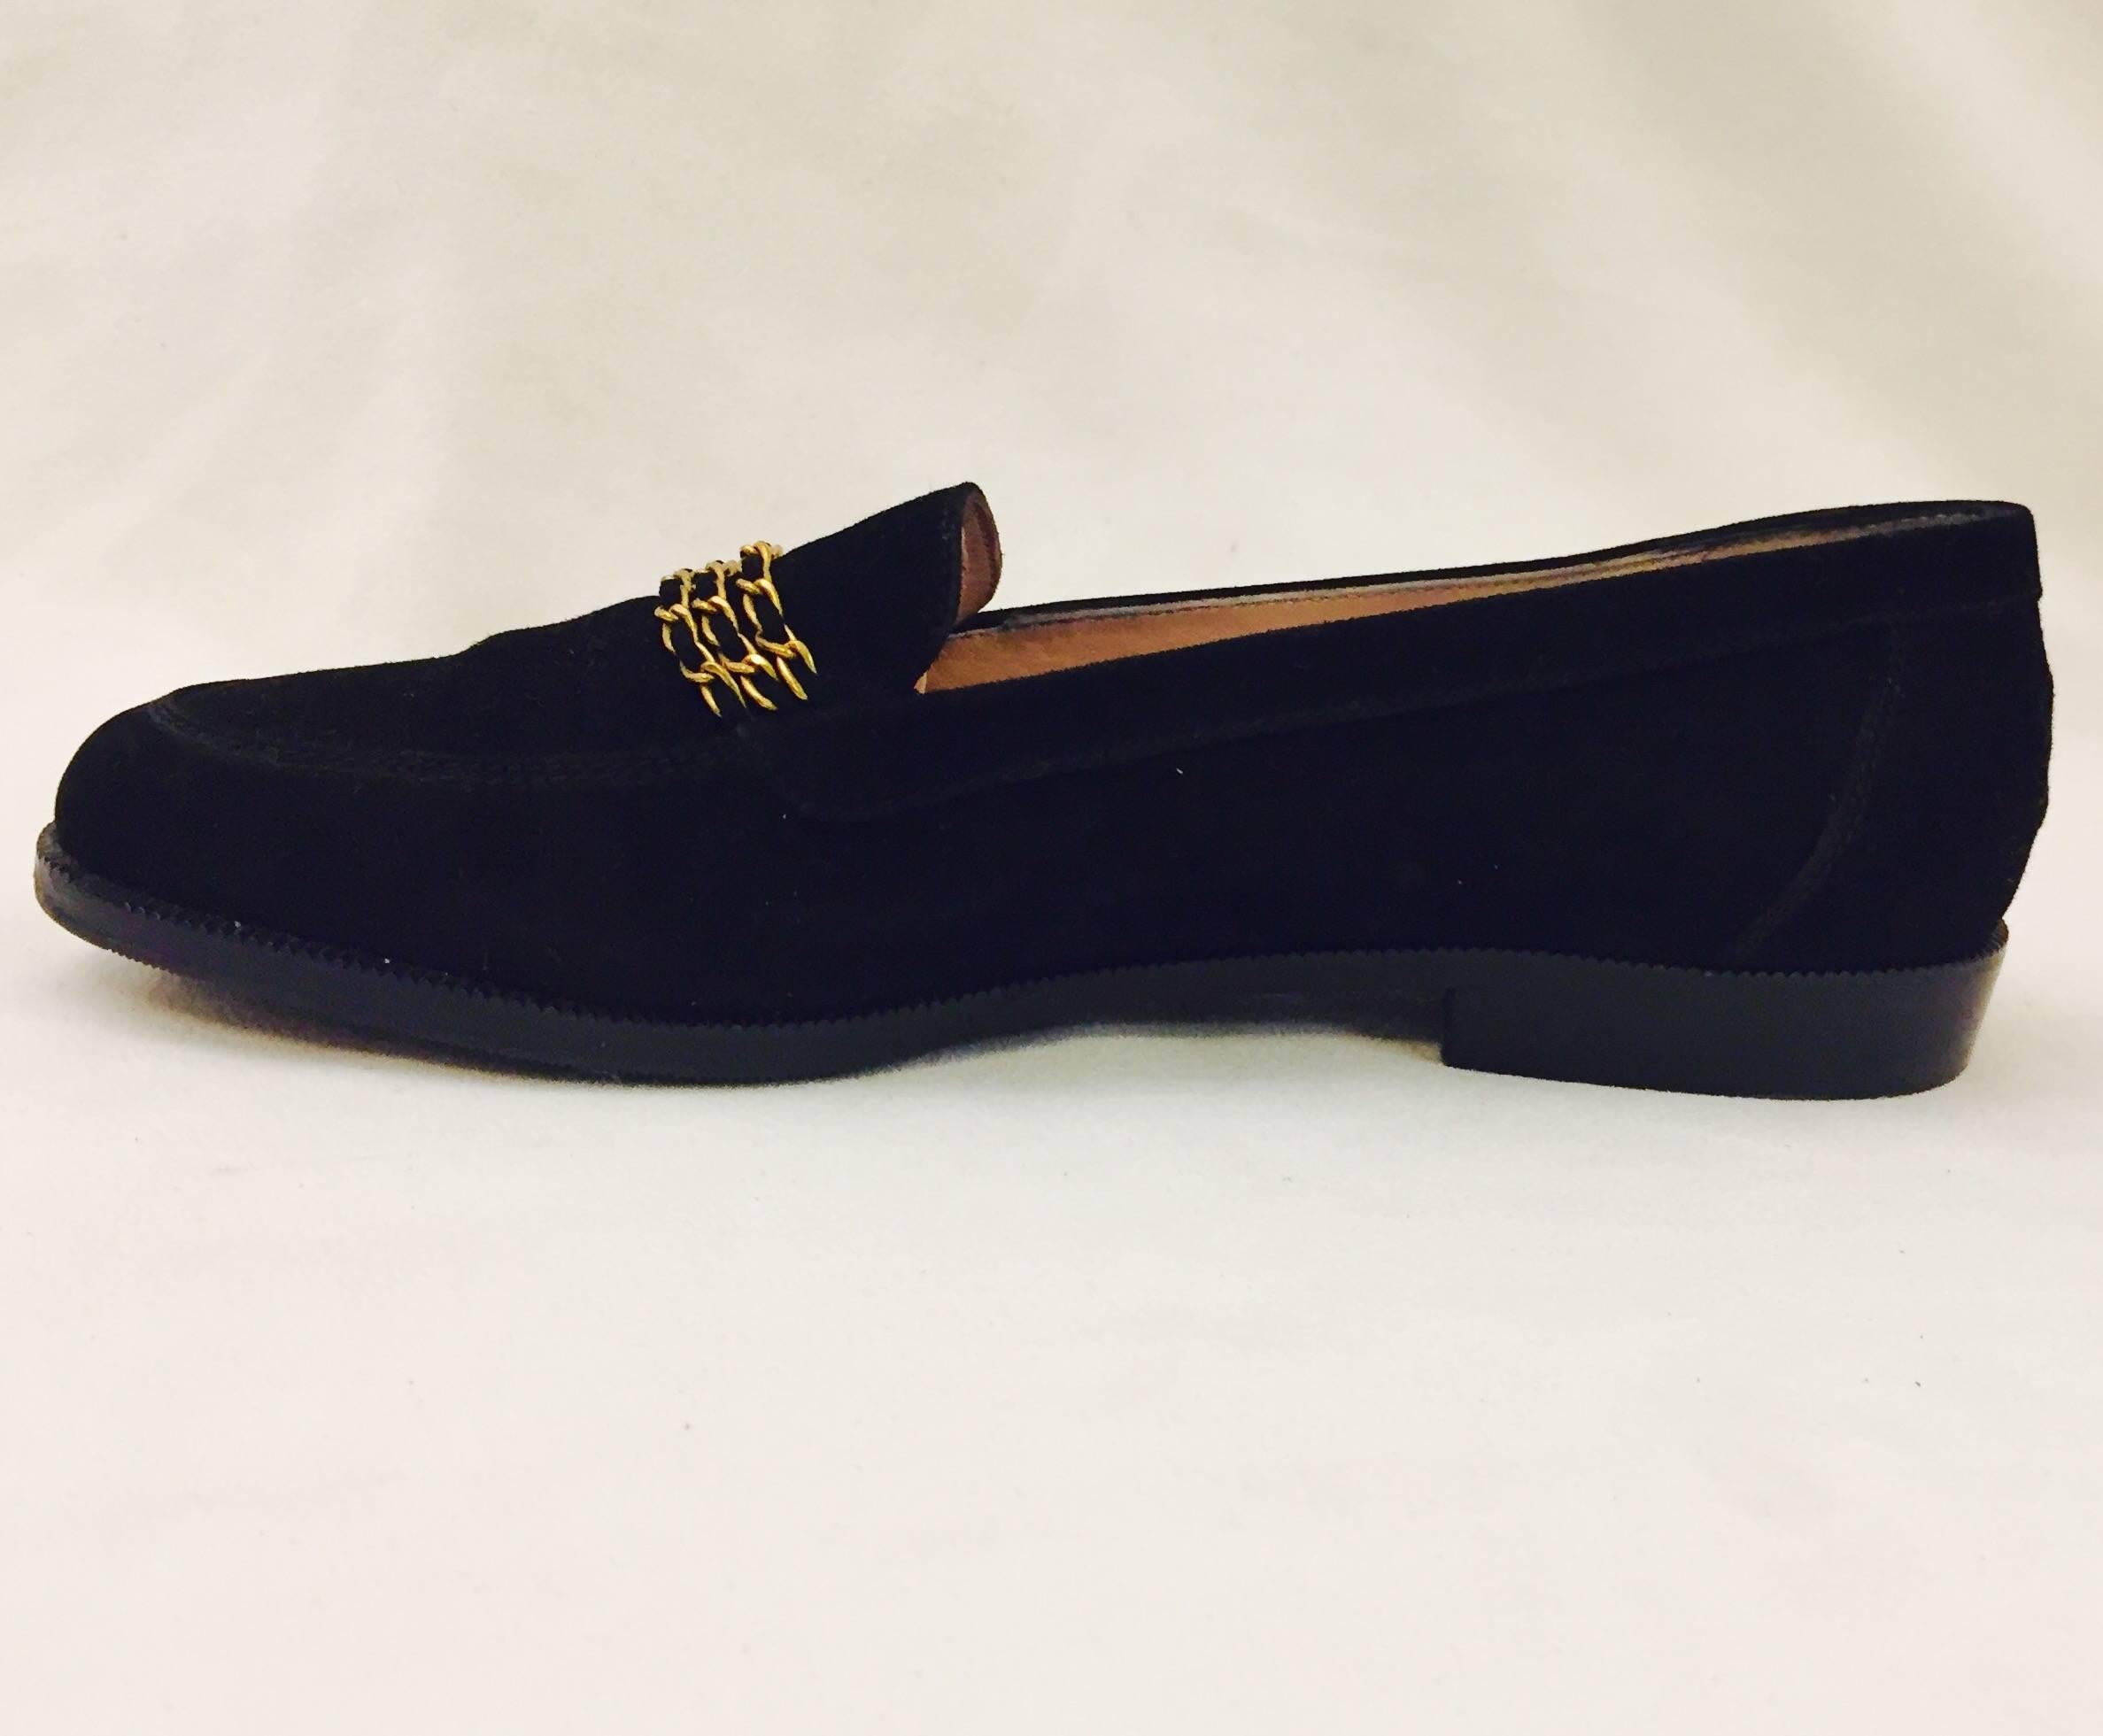 Adorned with three rows of Chanel's highly-coveted leather entwined chains these  black suede loafers are quintessentially chic!  Features black suede uppers and tan leather insole and lining.  Excellent condition. 

Made in Italy